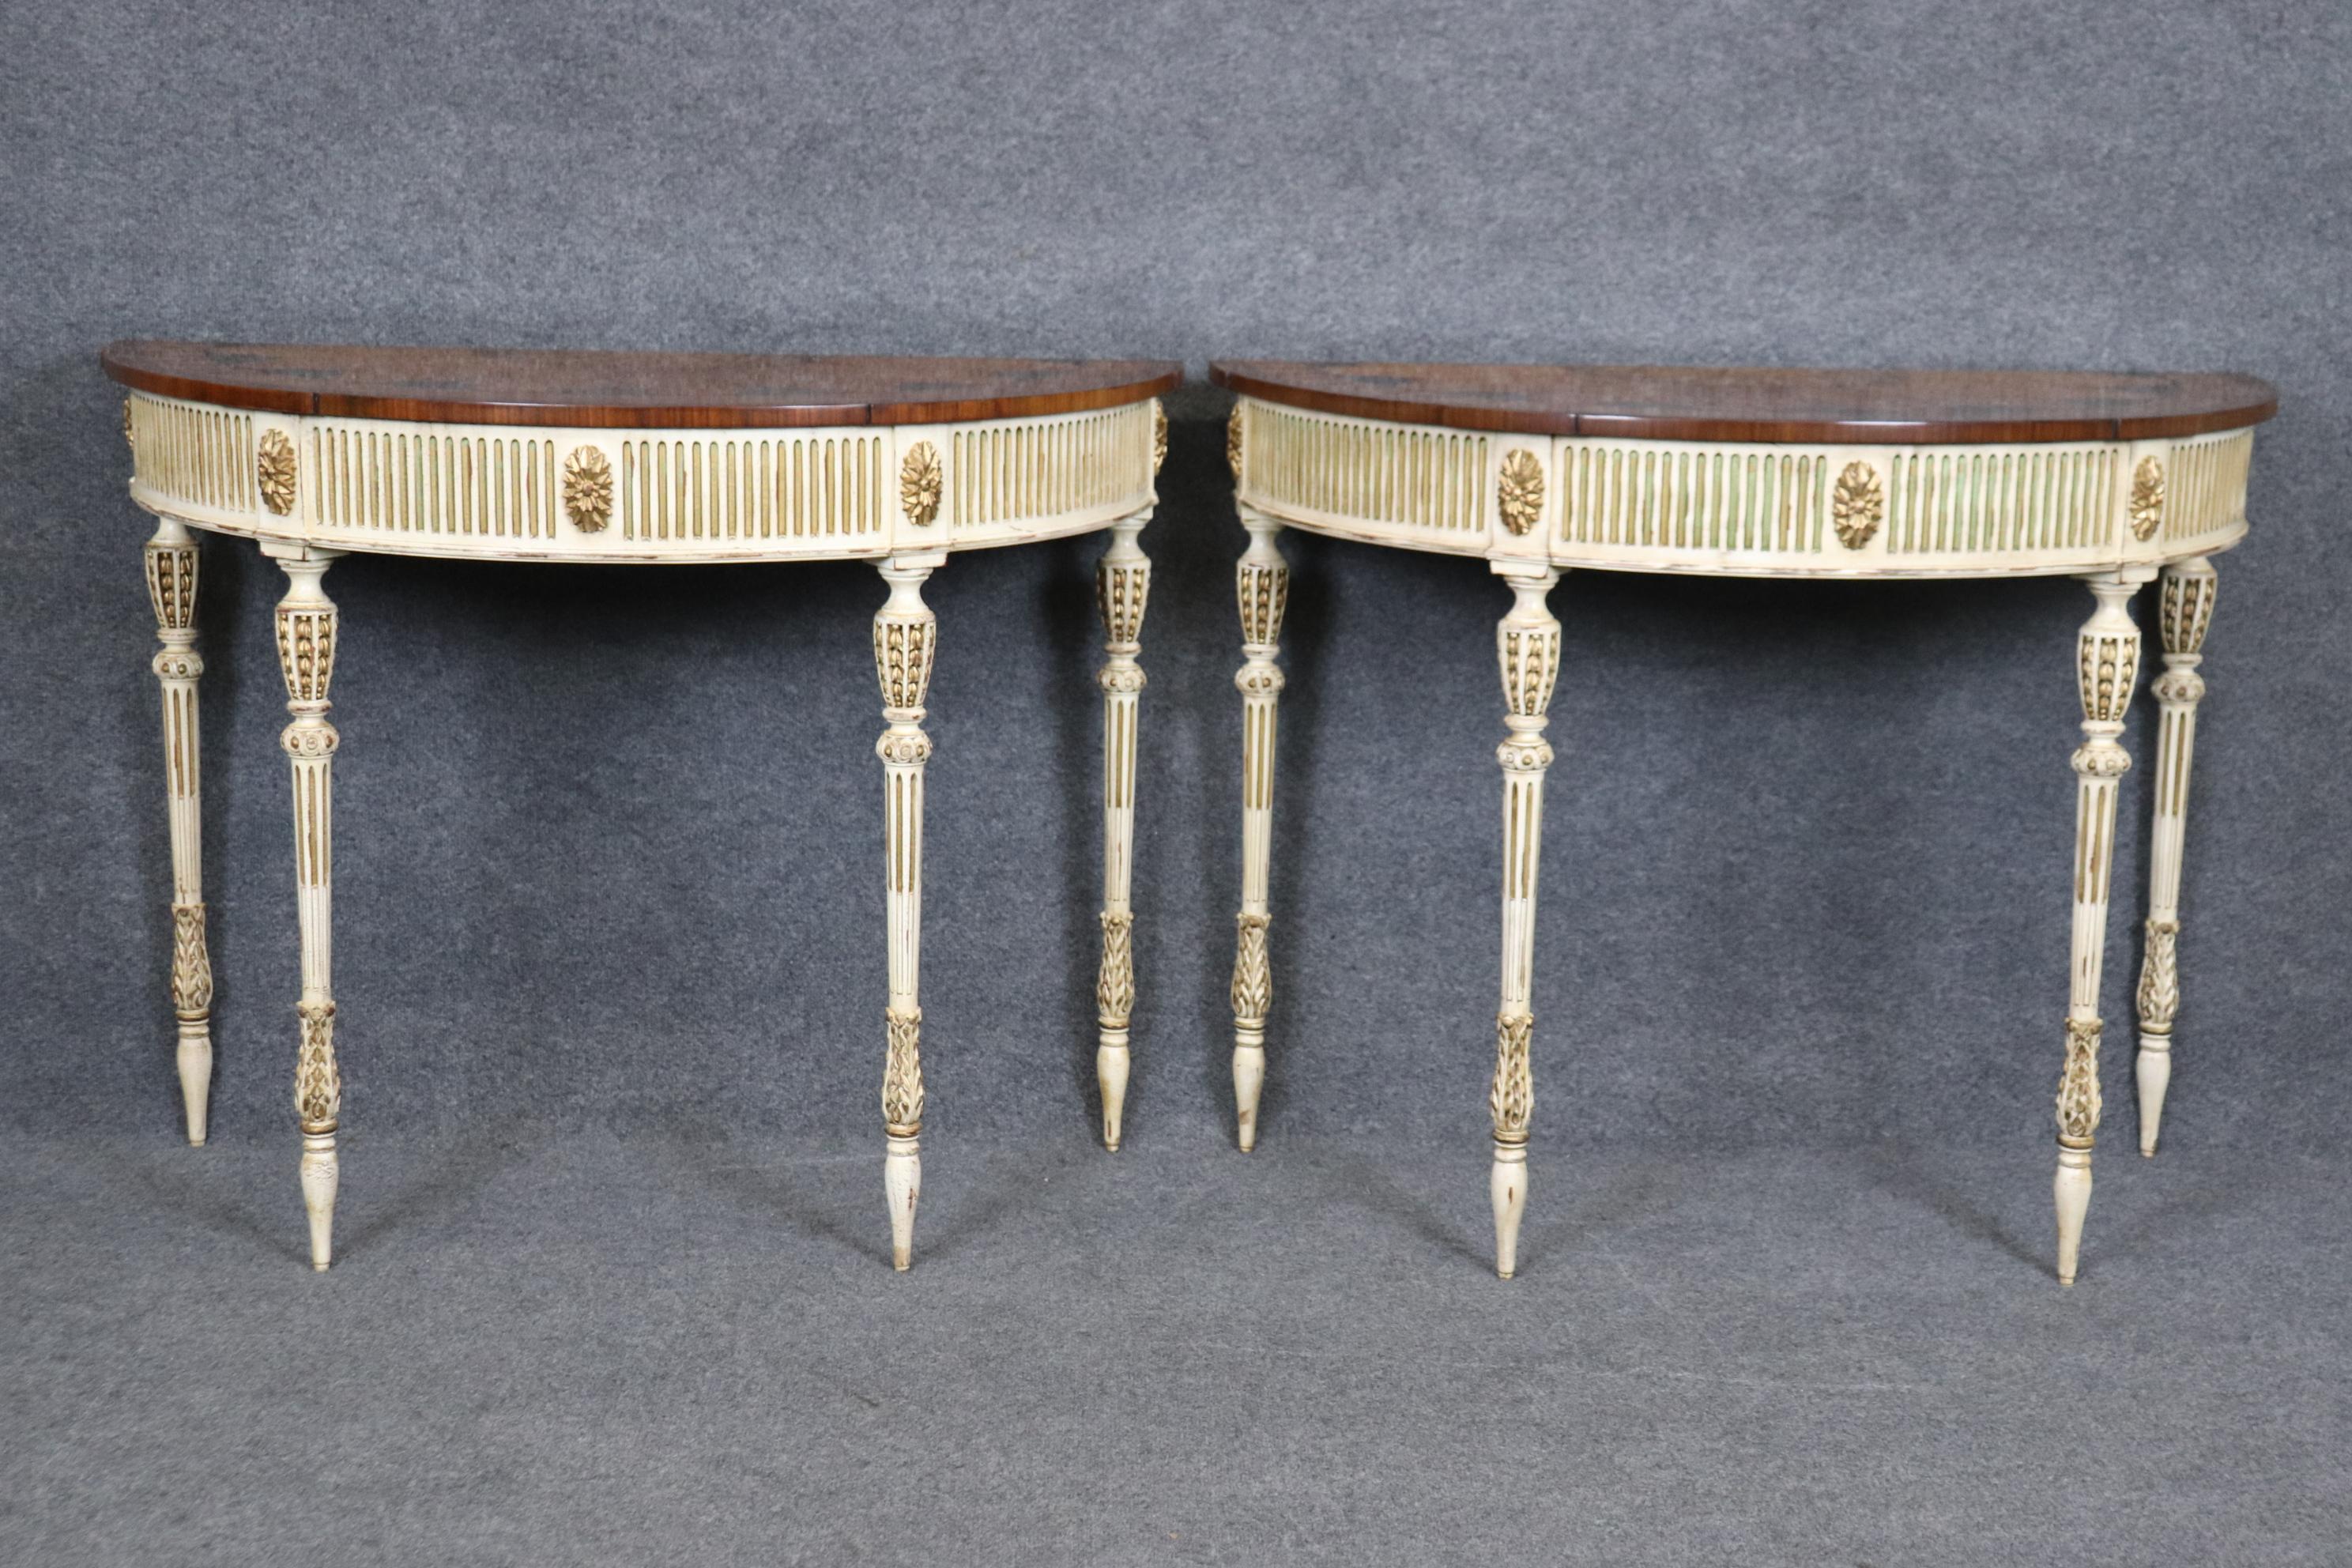 Contemporary Pair of E.J. Victor Paint Decorated Inlaid Adams Paint Decorated Console Tables